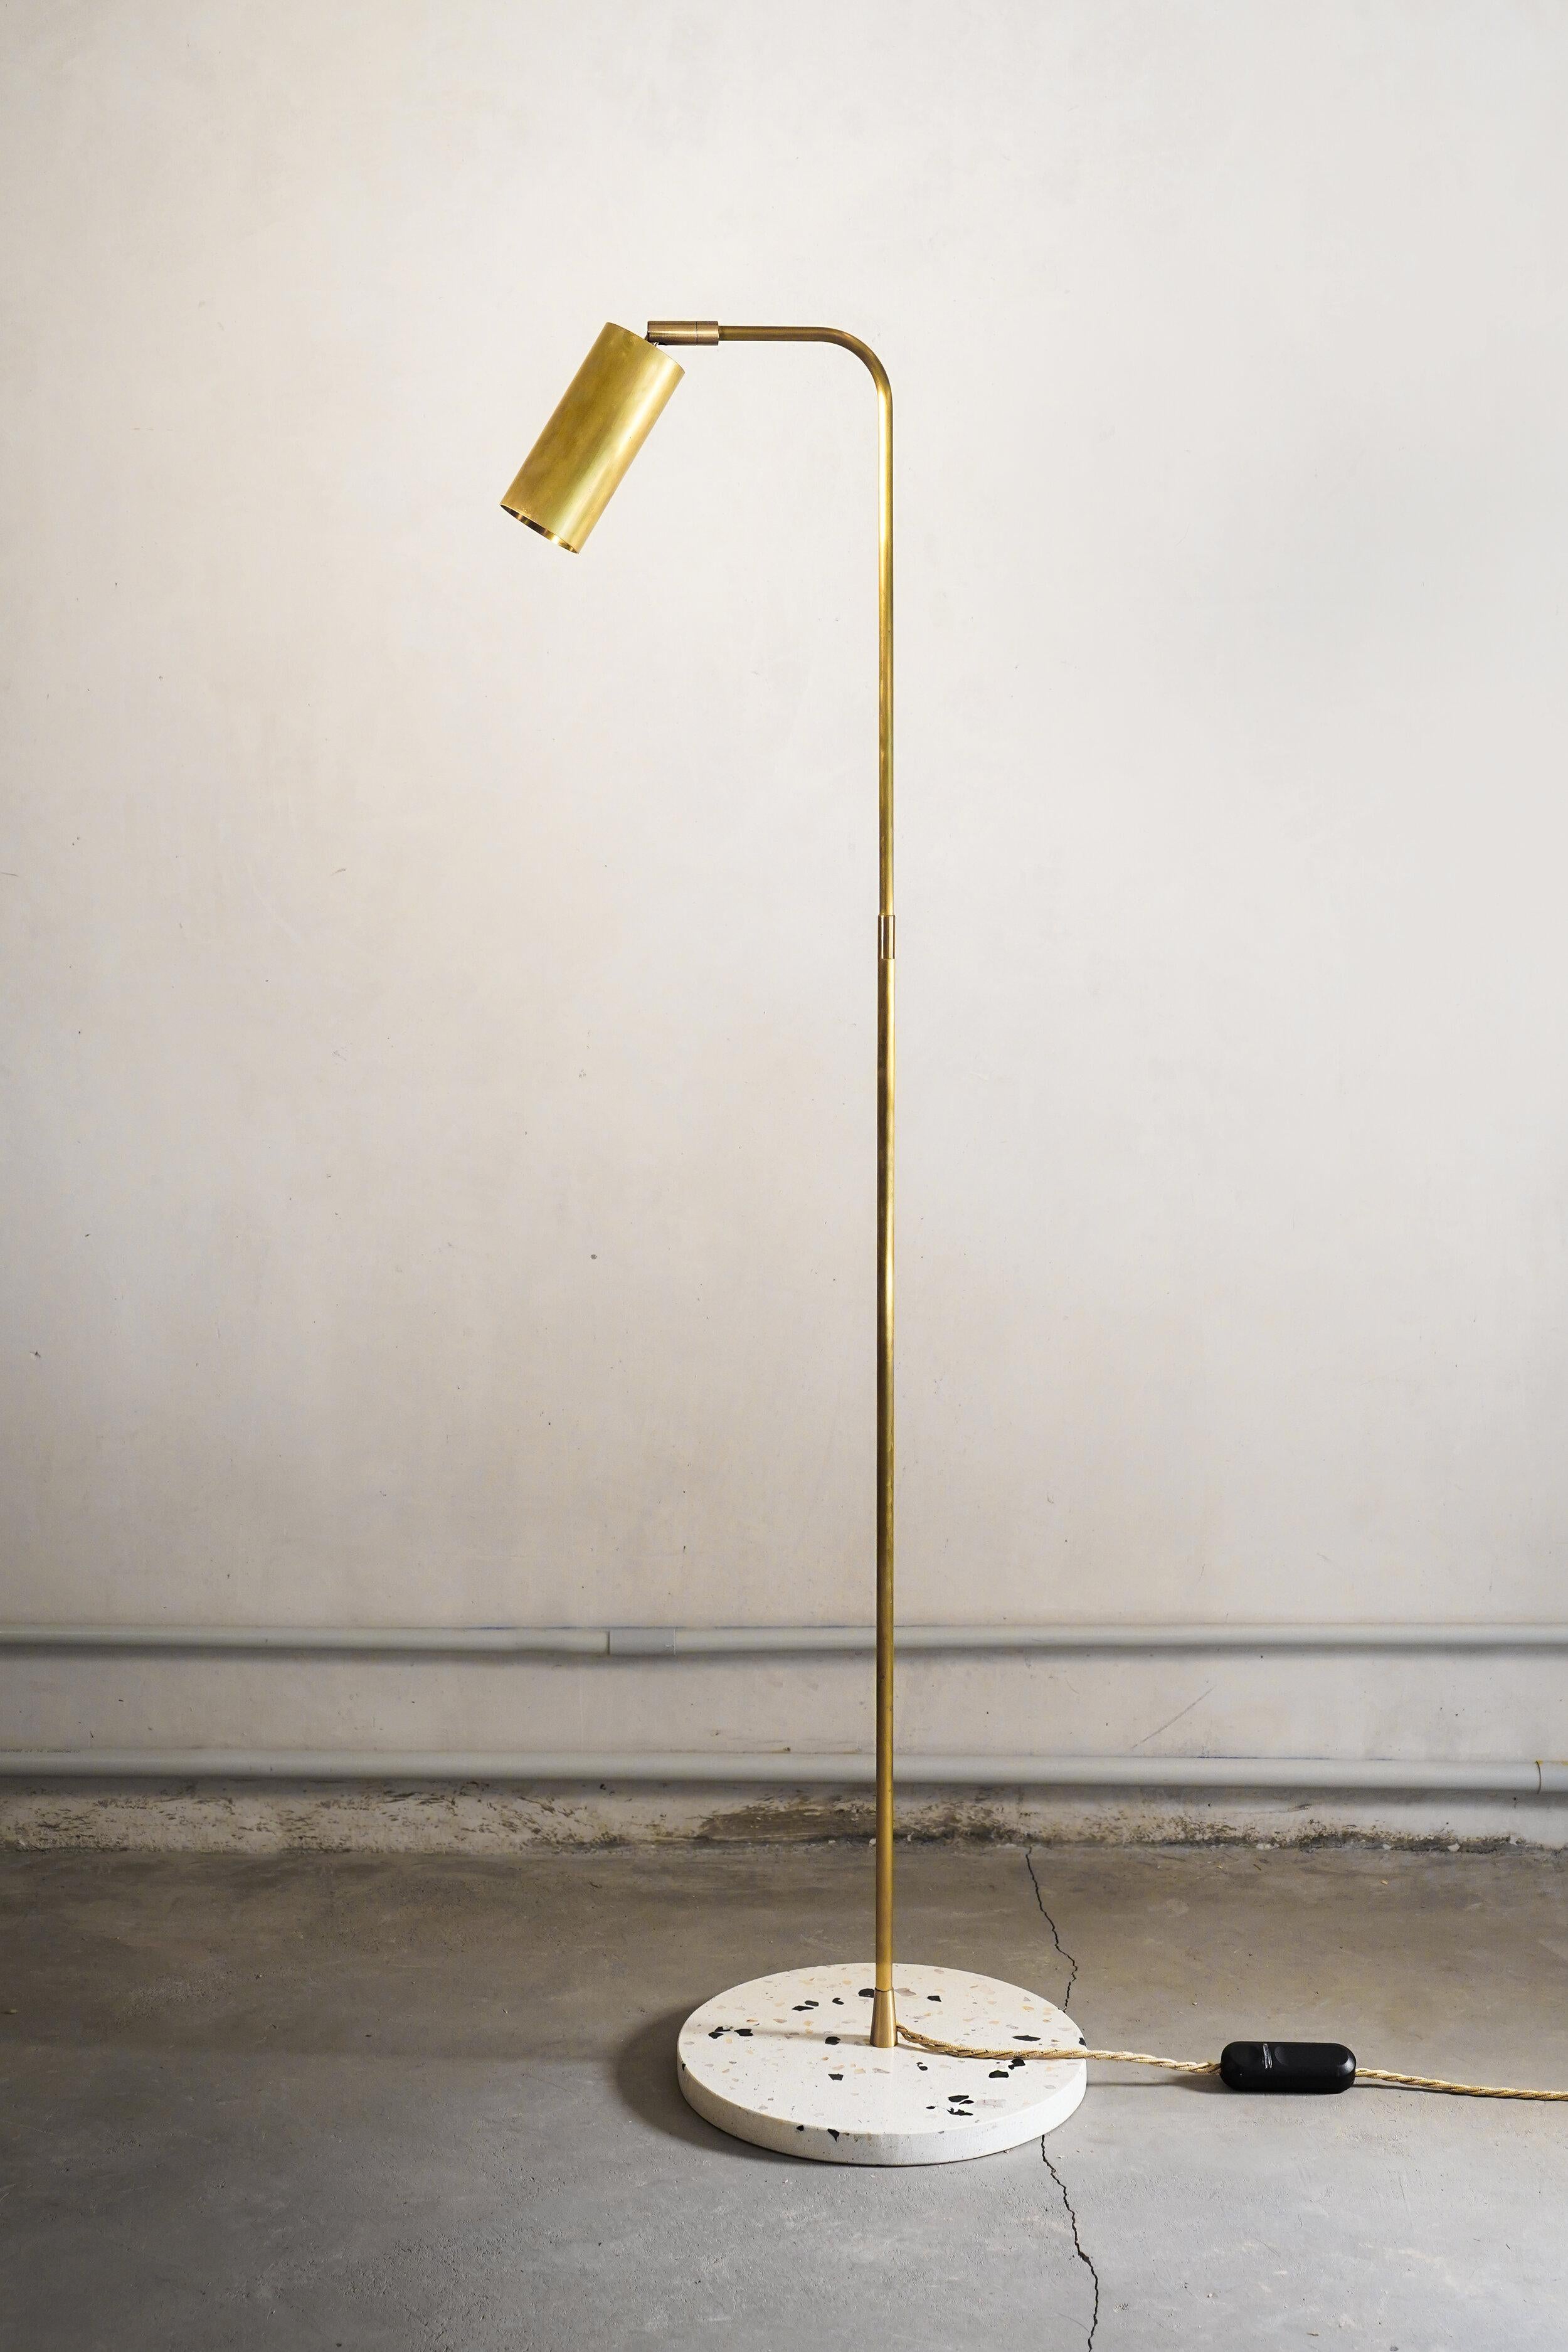 Book XL floor arm lightby Contain
Dimensions: D 28 x W 28 x H 130 cm 
Materials: brass structure and stone base.
Also available in different finishes. 

All our lamps can be wired according to each country. If sold to the USA it will be wired